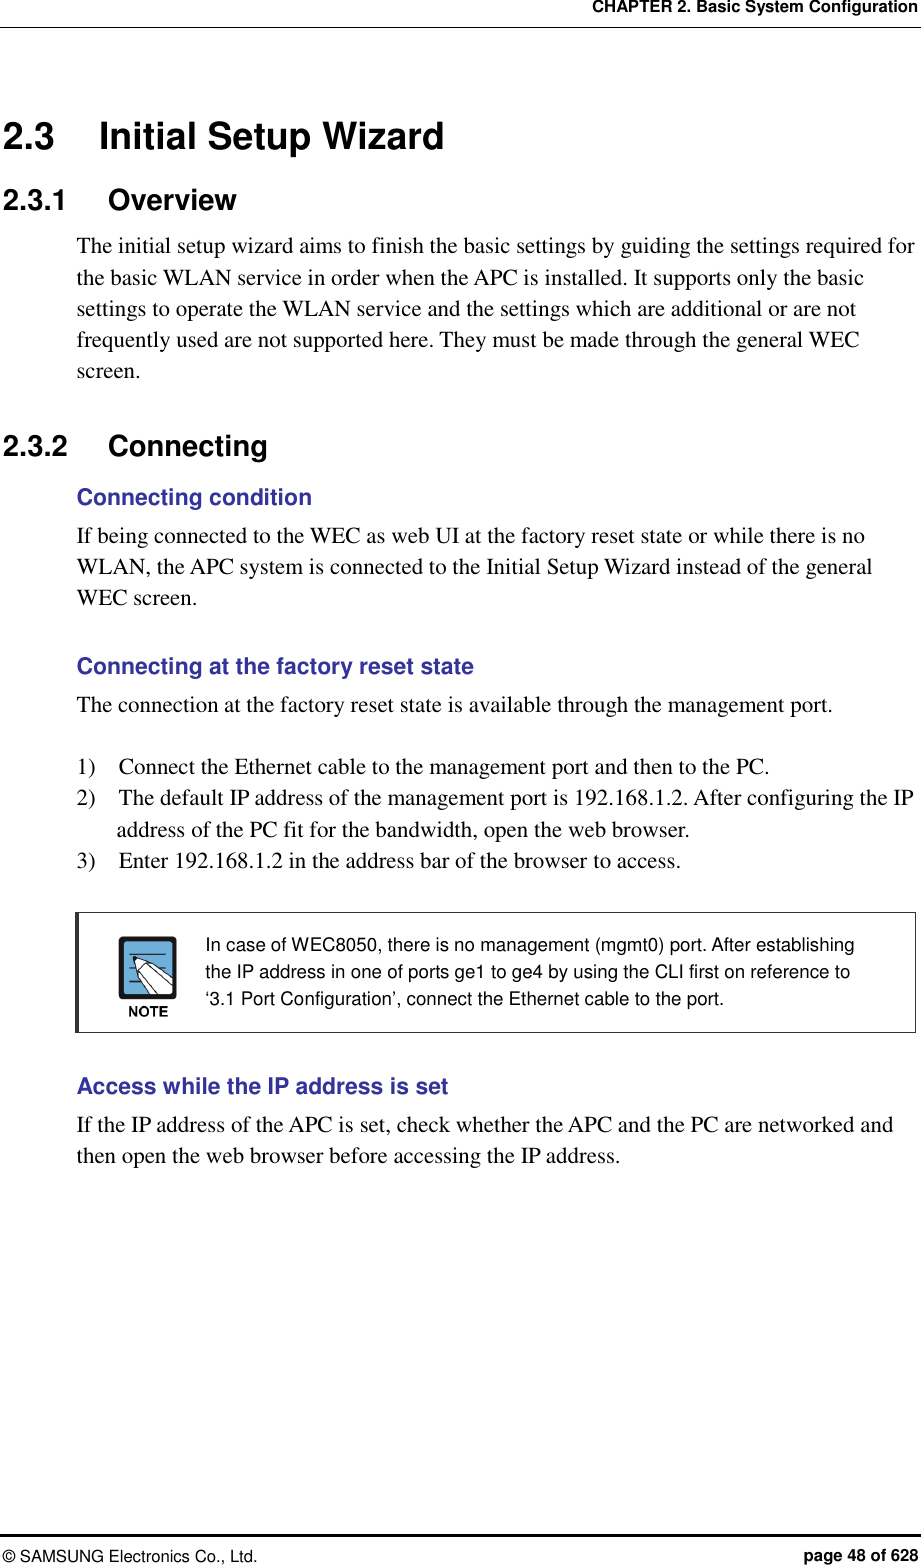 CHAPTER 2. Basic System Configuration ©  SAMSUNG Electronics Co., Ltd.  page 48 of 628 2.3  Initial Setup Wizard 2.3.1  Overview The initial setup wizard aims to finish the basic settings by guiding the settings required for the basic WLAN service in order when the APC is installed. It supports only the basic settings to operate the WLAN service and the settings which are additional or are not frequently used are not supported here. They must be made through the general WEC screen.  2.3.2  Connecting Connecting condition If being connected to the WEC as web UI at the factory reset state or while there is no WLAN, the APC system is connected to the Initial Setup Wizard instead of the general WEC screen.  Connecting at the factory reset state The connection at the factory reset state is available through the management port.  1)    Connect the Ethernet cable to the management port and then to the PC. 2)    The default IP address of the management port is 192.168.1.2. After configuring the IP address of the PC fit for the bandwidth, open the web browser. 3)    Enter 192.168.1.2 in the address bar of the browser to access.    In case of WEC8050, there is no management (mgmt0) port. After establishing the IP address in one of ports ge1 to ge4 by using the CLI first on reference to ‘3.1 Port Configuration’, connect the Ethernet cable to the port.  Access while the IP address is set If the IP address of the APC is set, check whether the APC and the PC are networked and then open the web browser before accessing the IP address.  